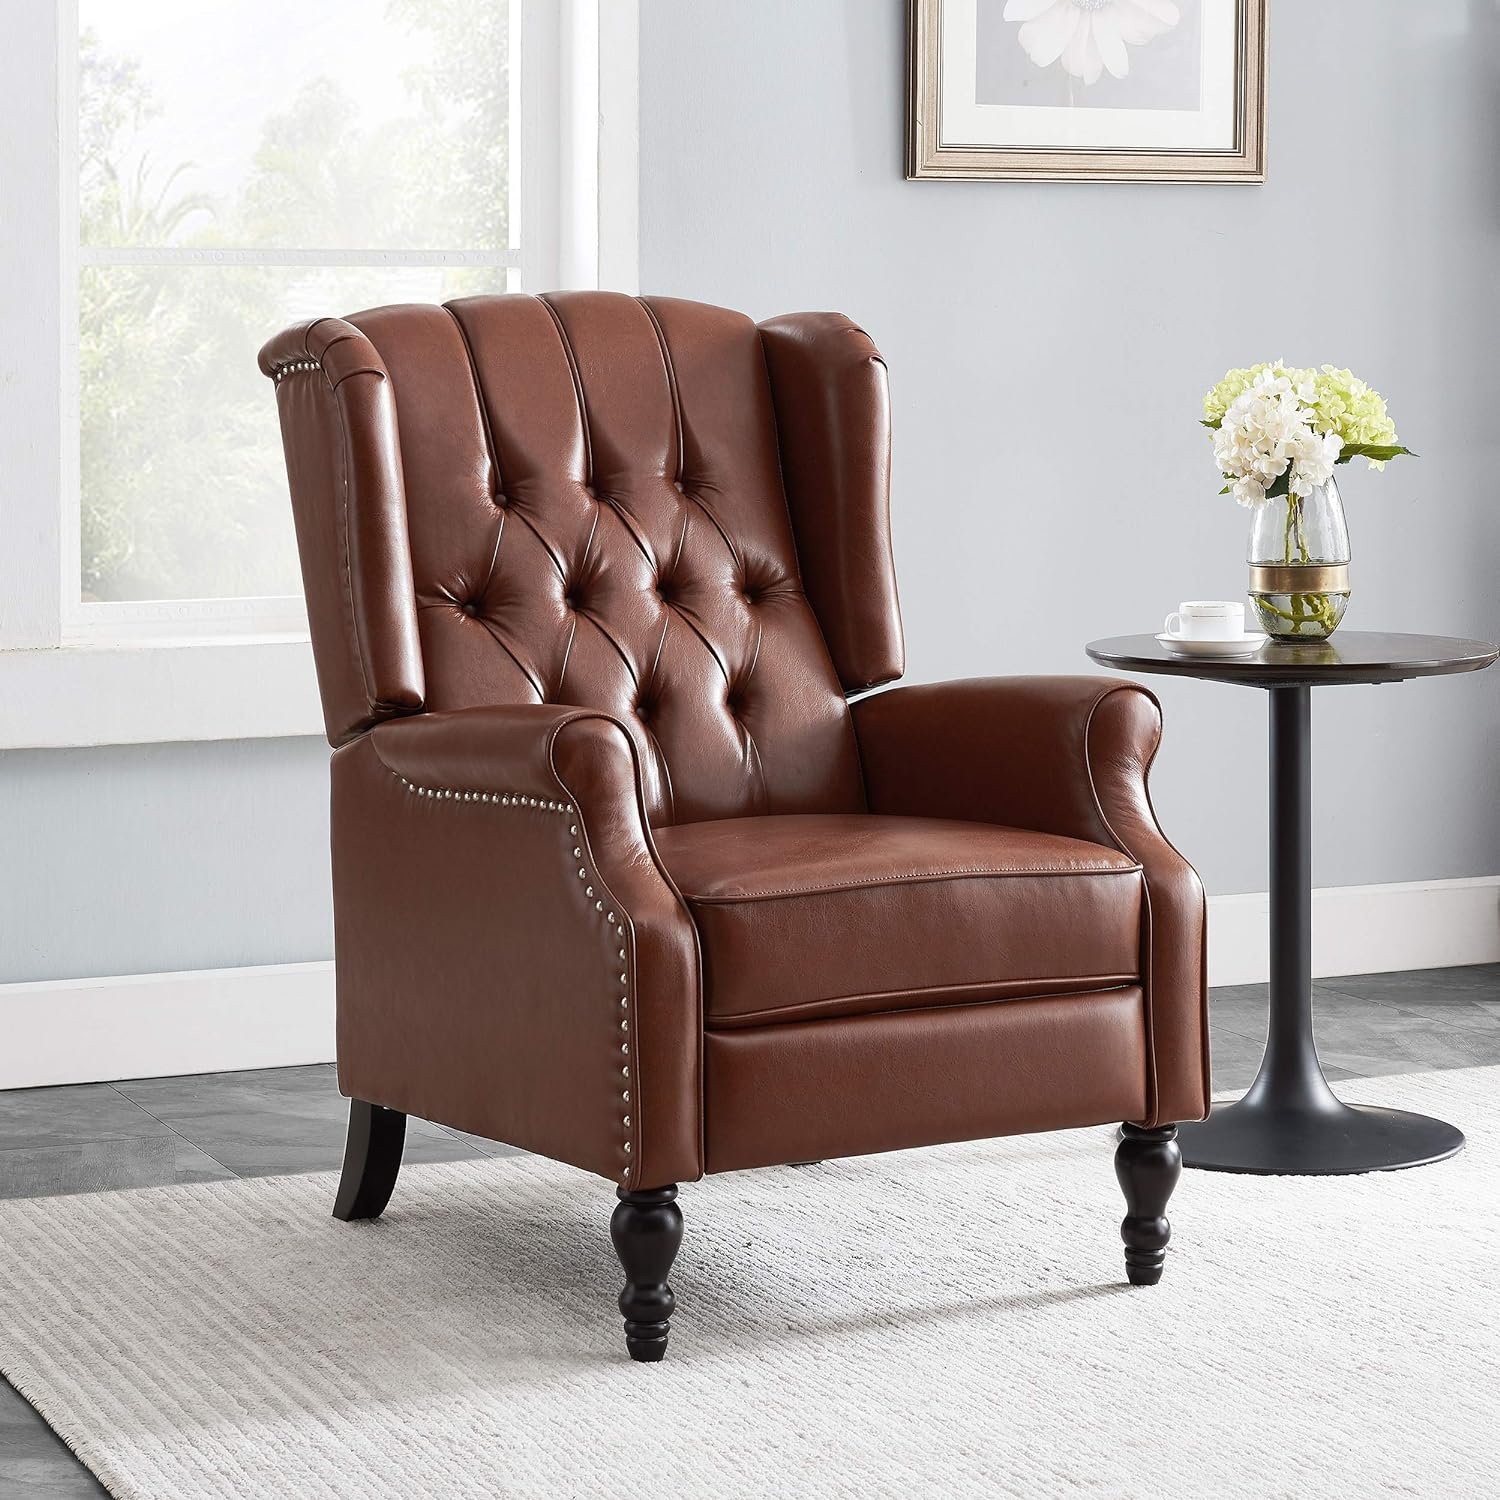 Christopher Knight Home Randy Contemporary Tufted Recliner, Cognac Brown, Dark Brown 62D x 28.5W x 29H Inch